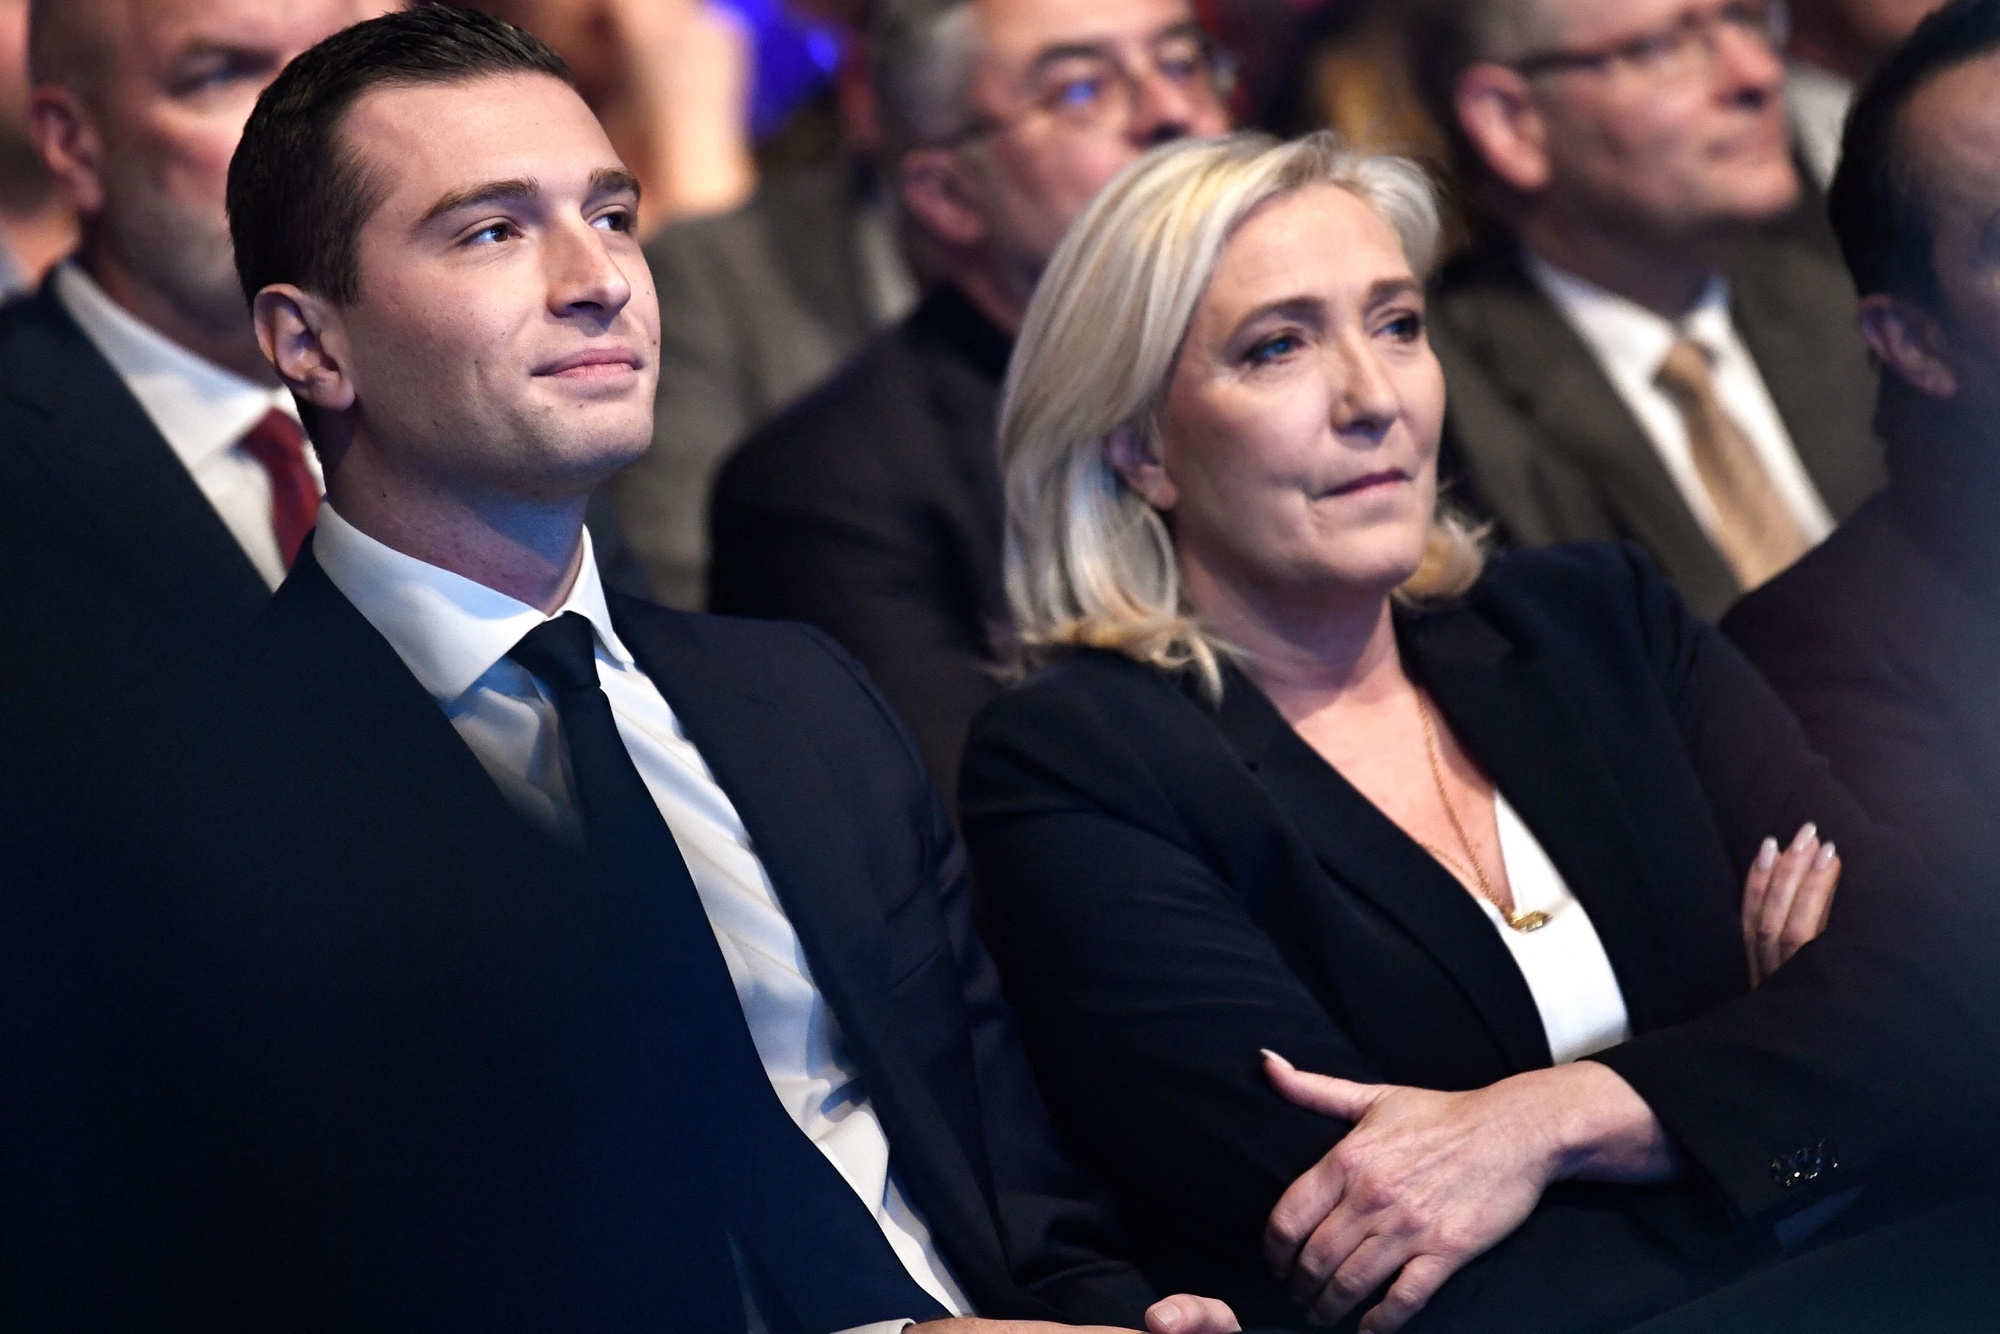 Le Pen feud deepens as French far-right leader's niece withdraws support, Marine Le Pen